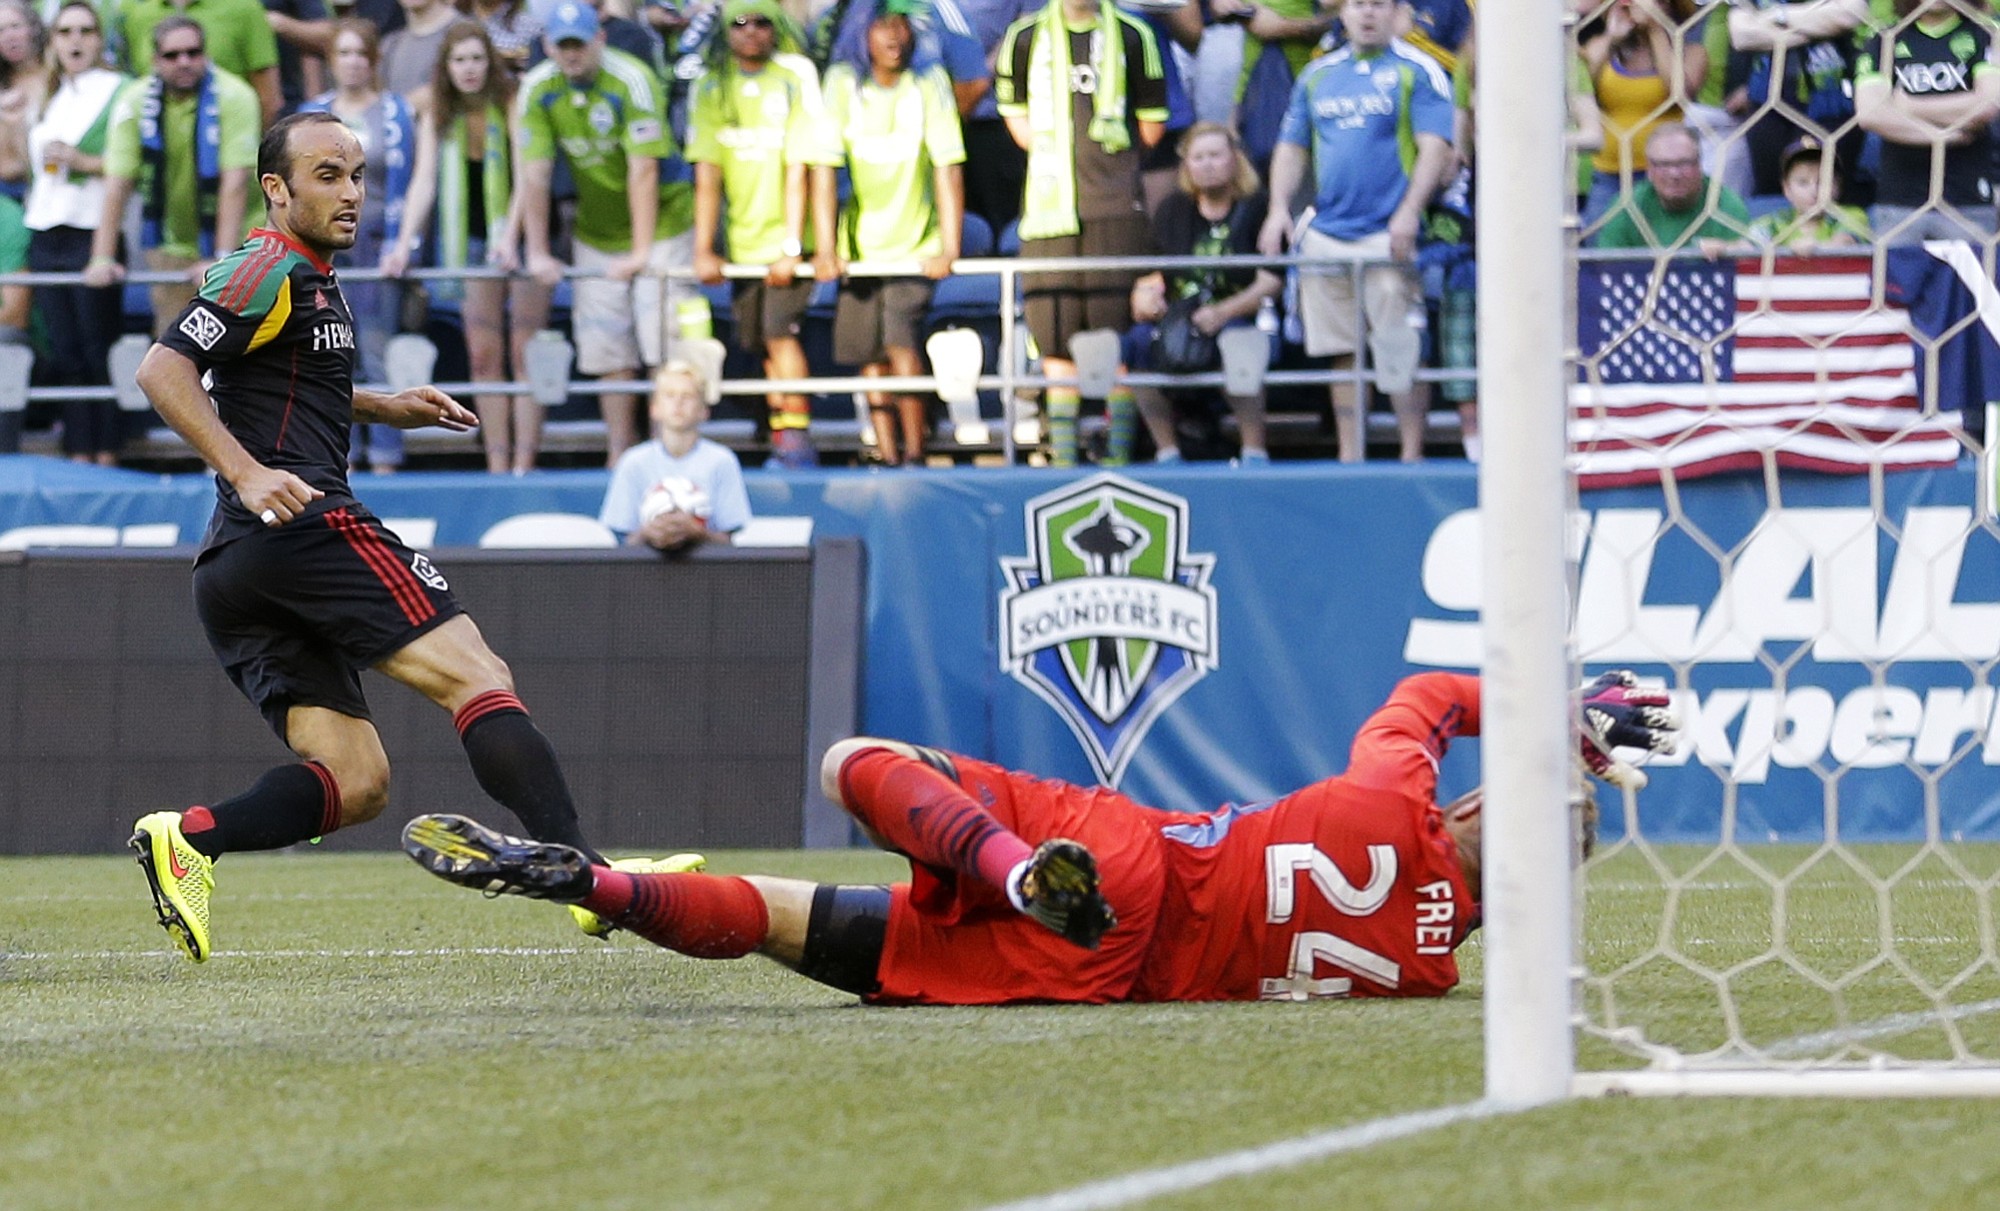 Los Angeles Galaxy's Landon Donovan, left, scores a goal on Seattle Sounders goalkeeper Stefan Frei, right, in the first half Monday, July 28, 2014, in Seattle. (AP Photo/Ted S.